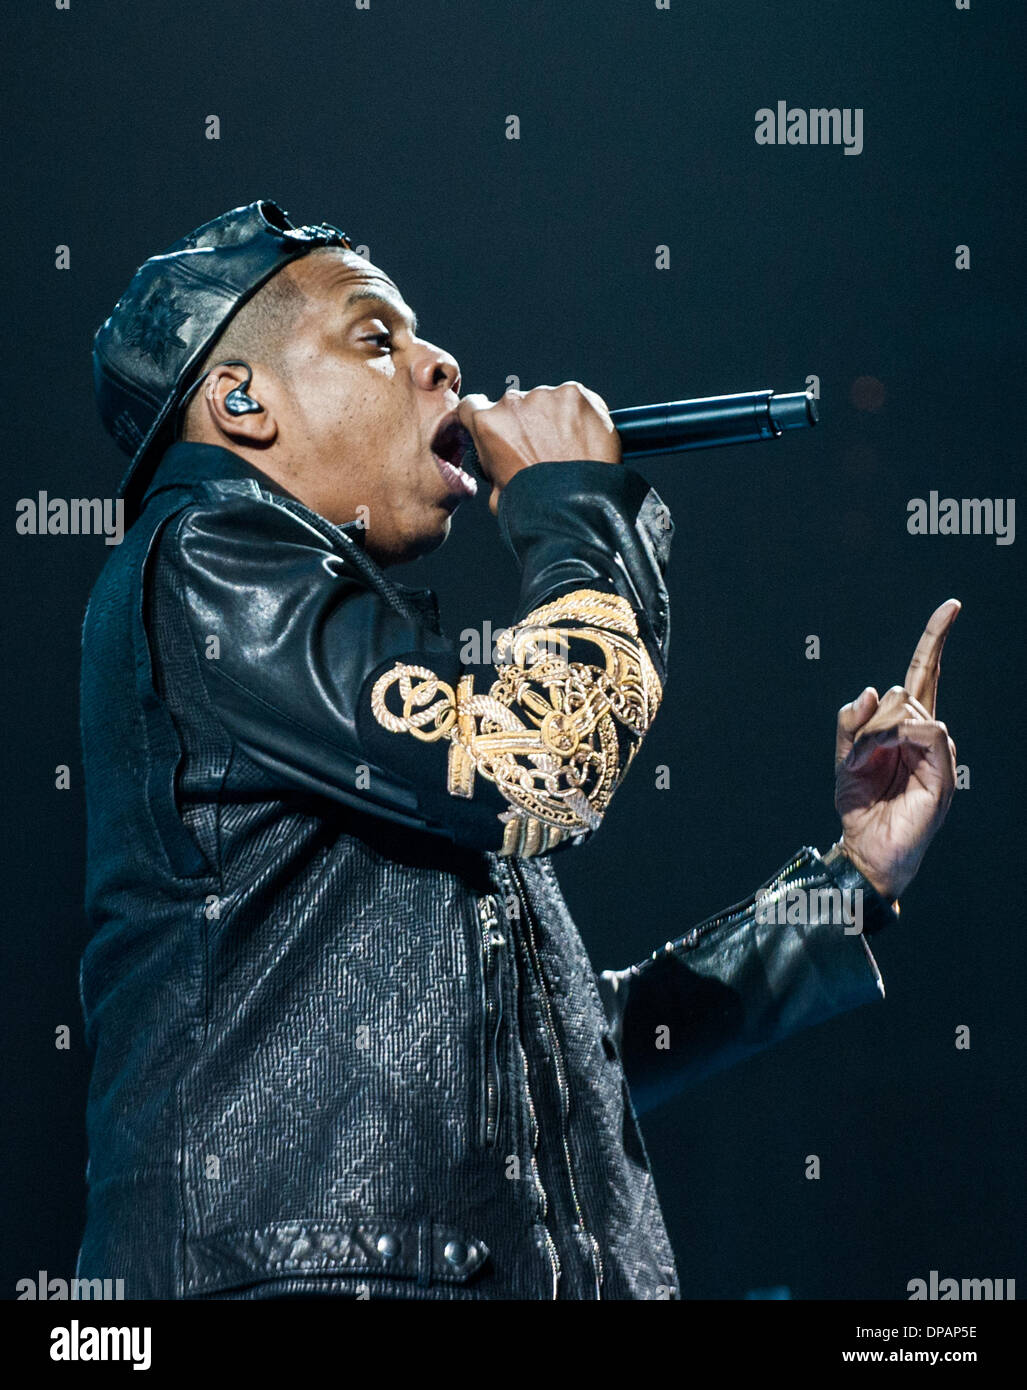 Chicago, Illinois, USA. 9th January 2014. Jay Z (Shawn Carter) performing at Chicago's United Center during his 'Magna Carter World Tour'. January 9, 2014 Credit:  Brigette Sullivan/Alamy Live News Stock Photo